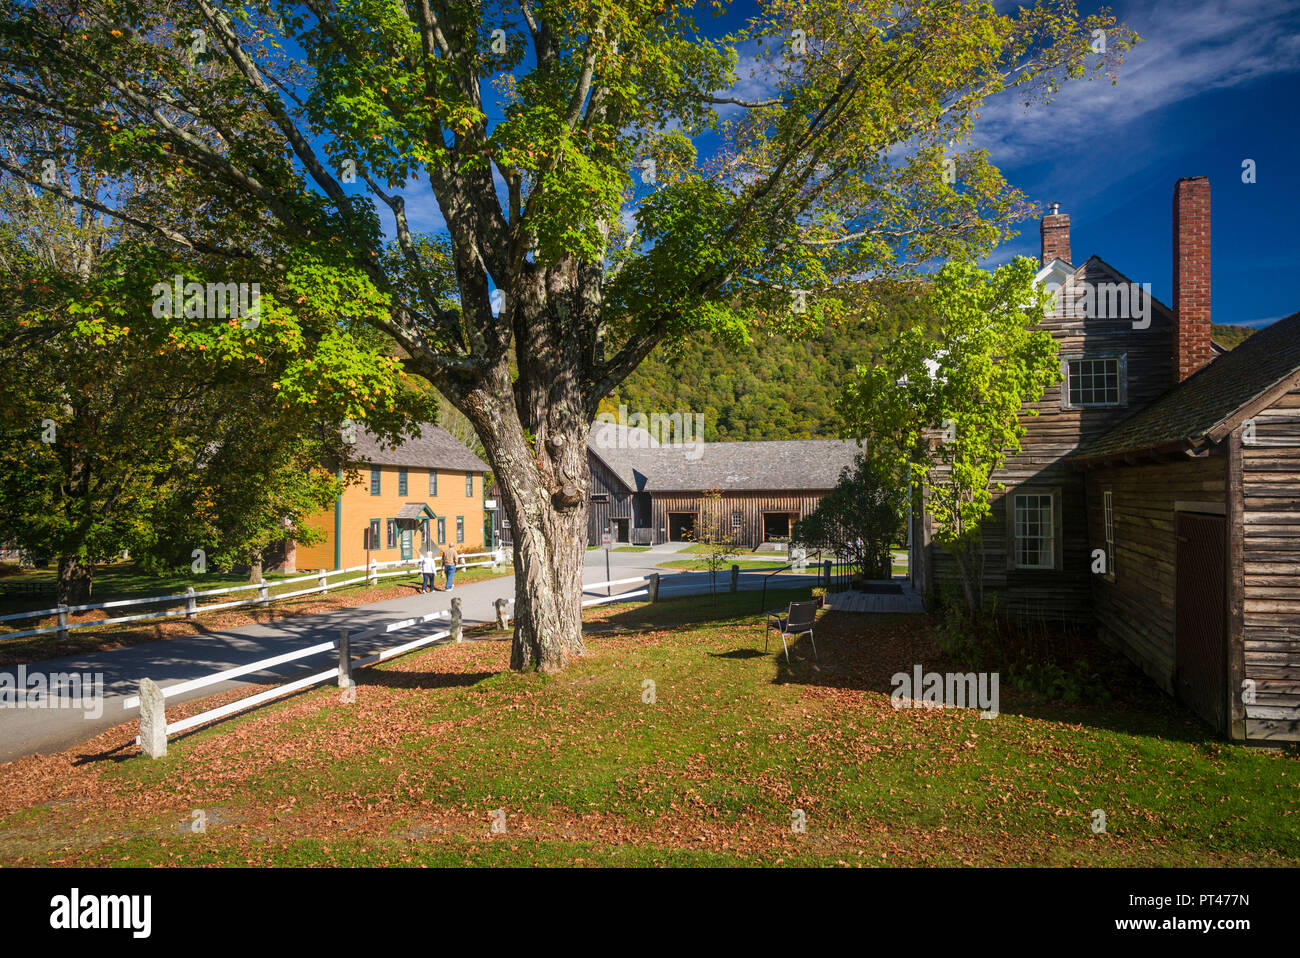 USA, New England, Vermont, Plymouth Notch, President Calvin Coolidge State Historic Site, village was the birthplace of US President Calvin Coolidge, village buildings Stock Photo